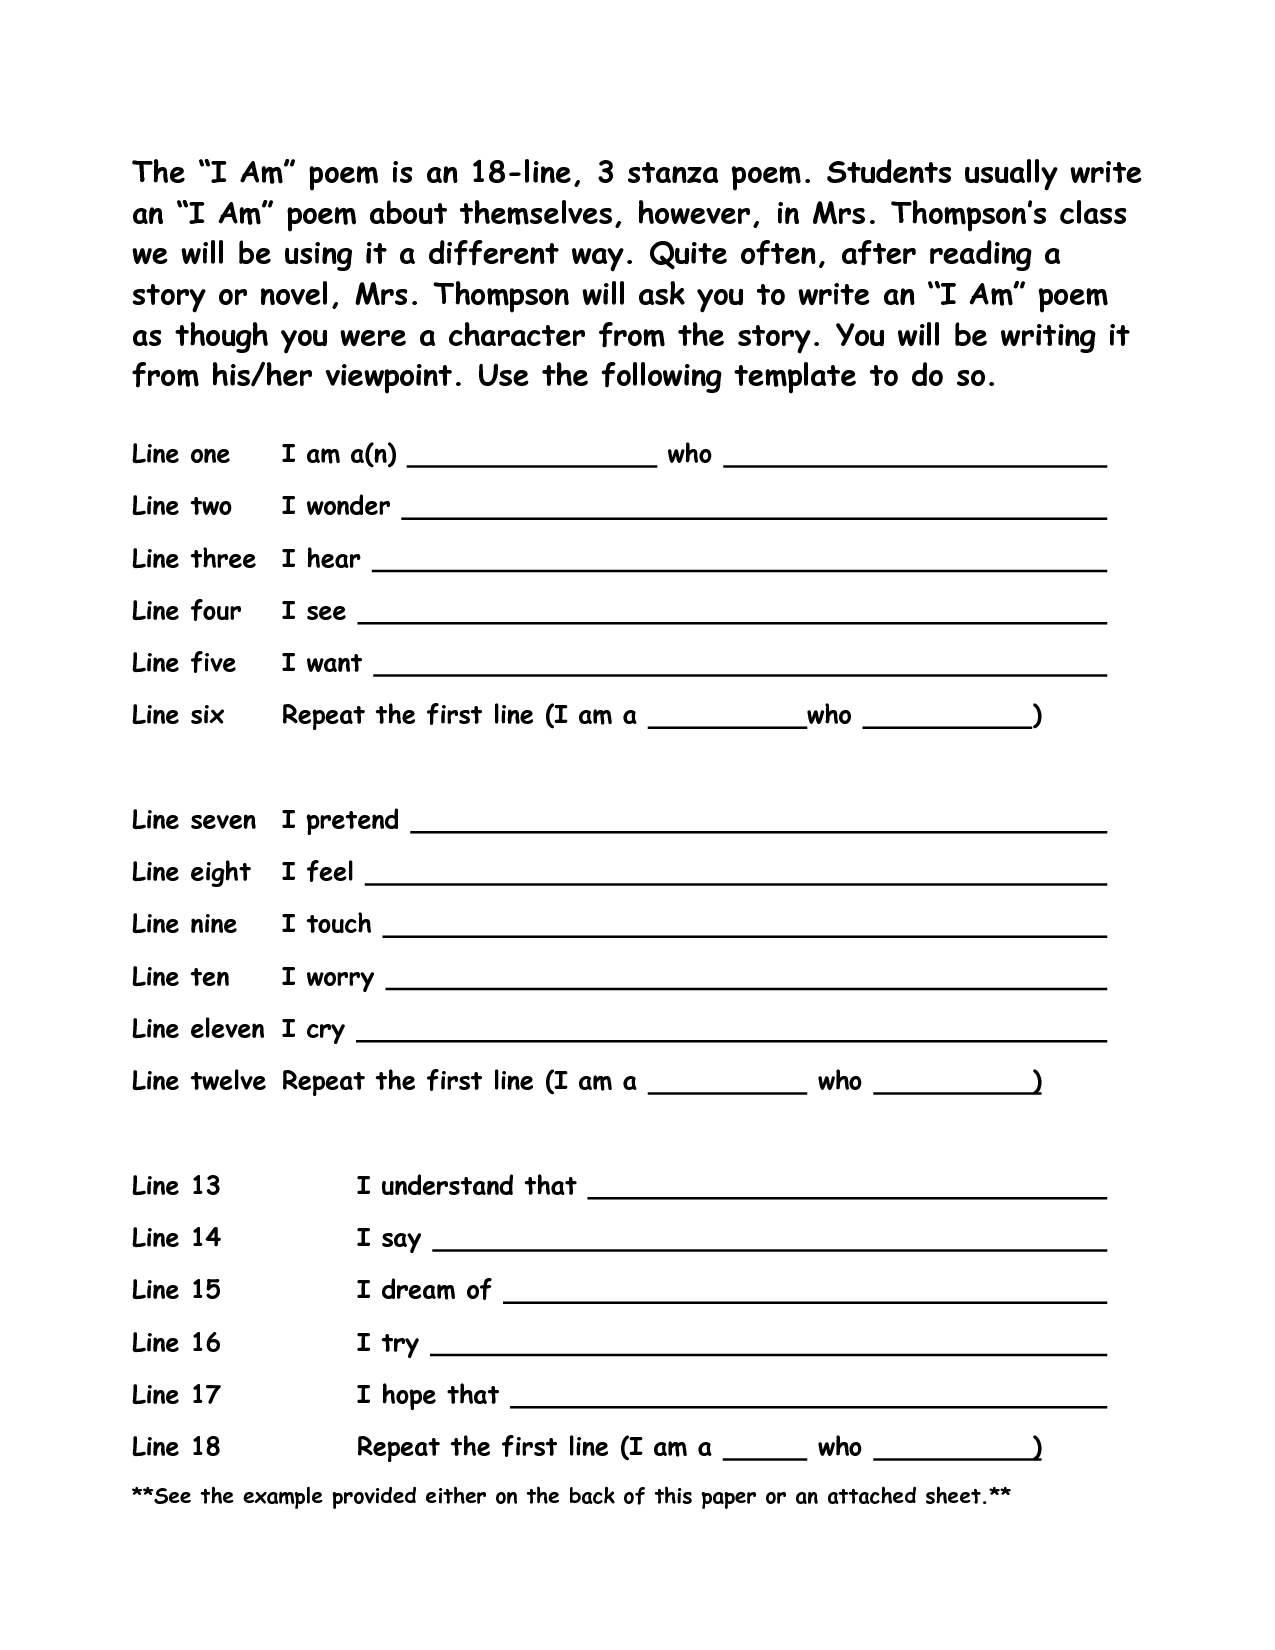 Examples of I AM Poems Template